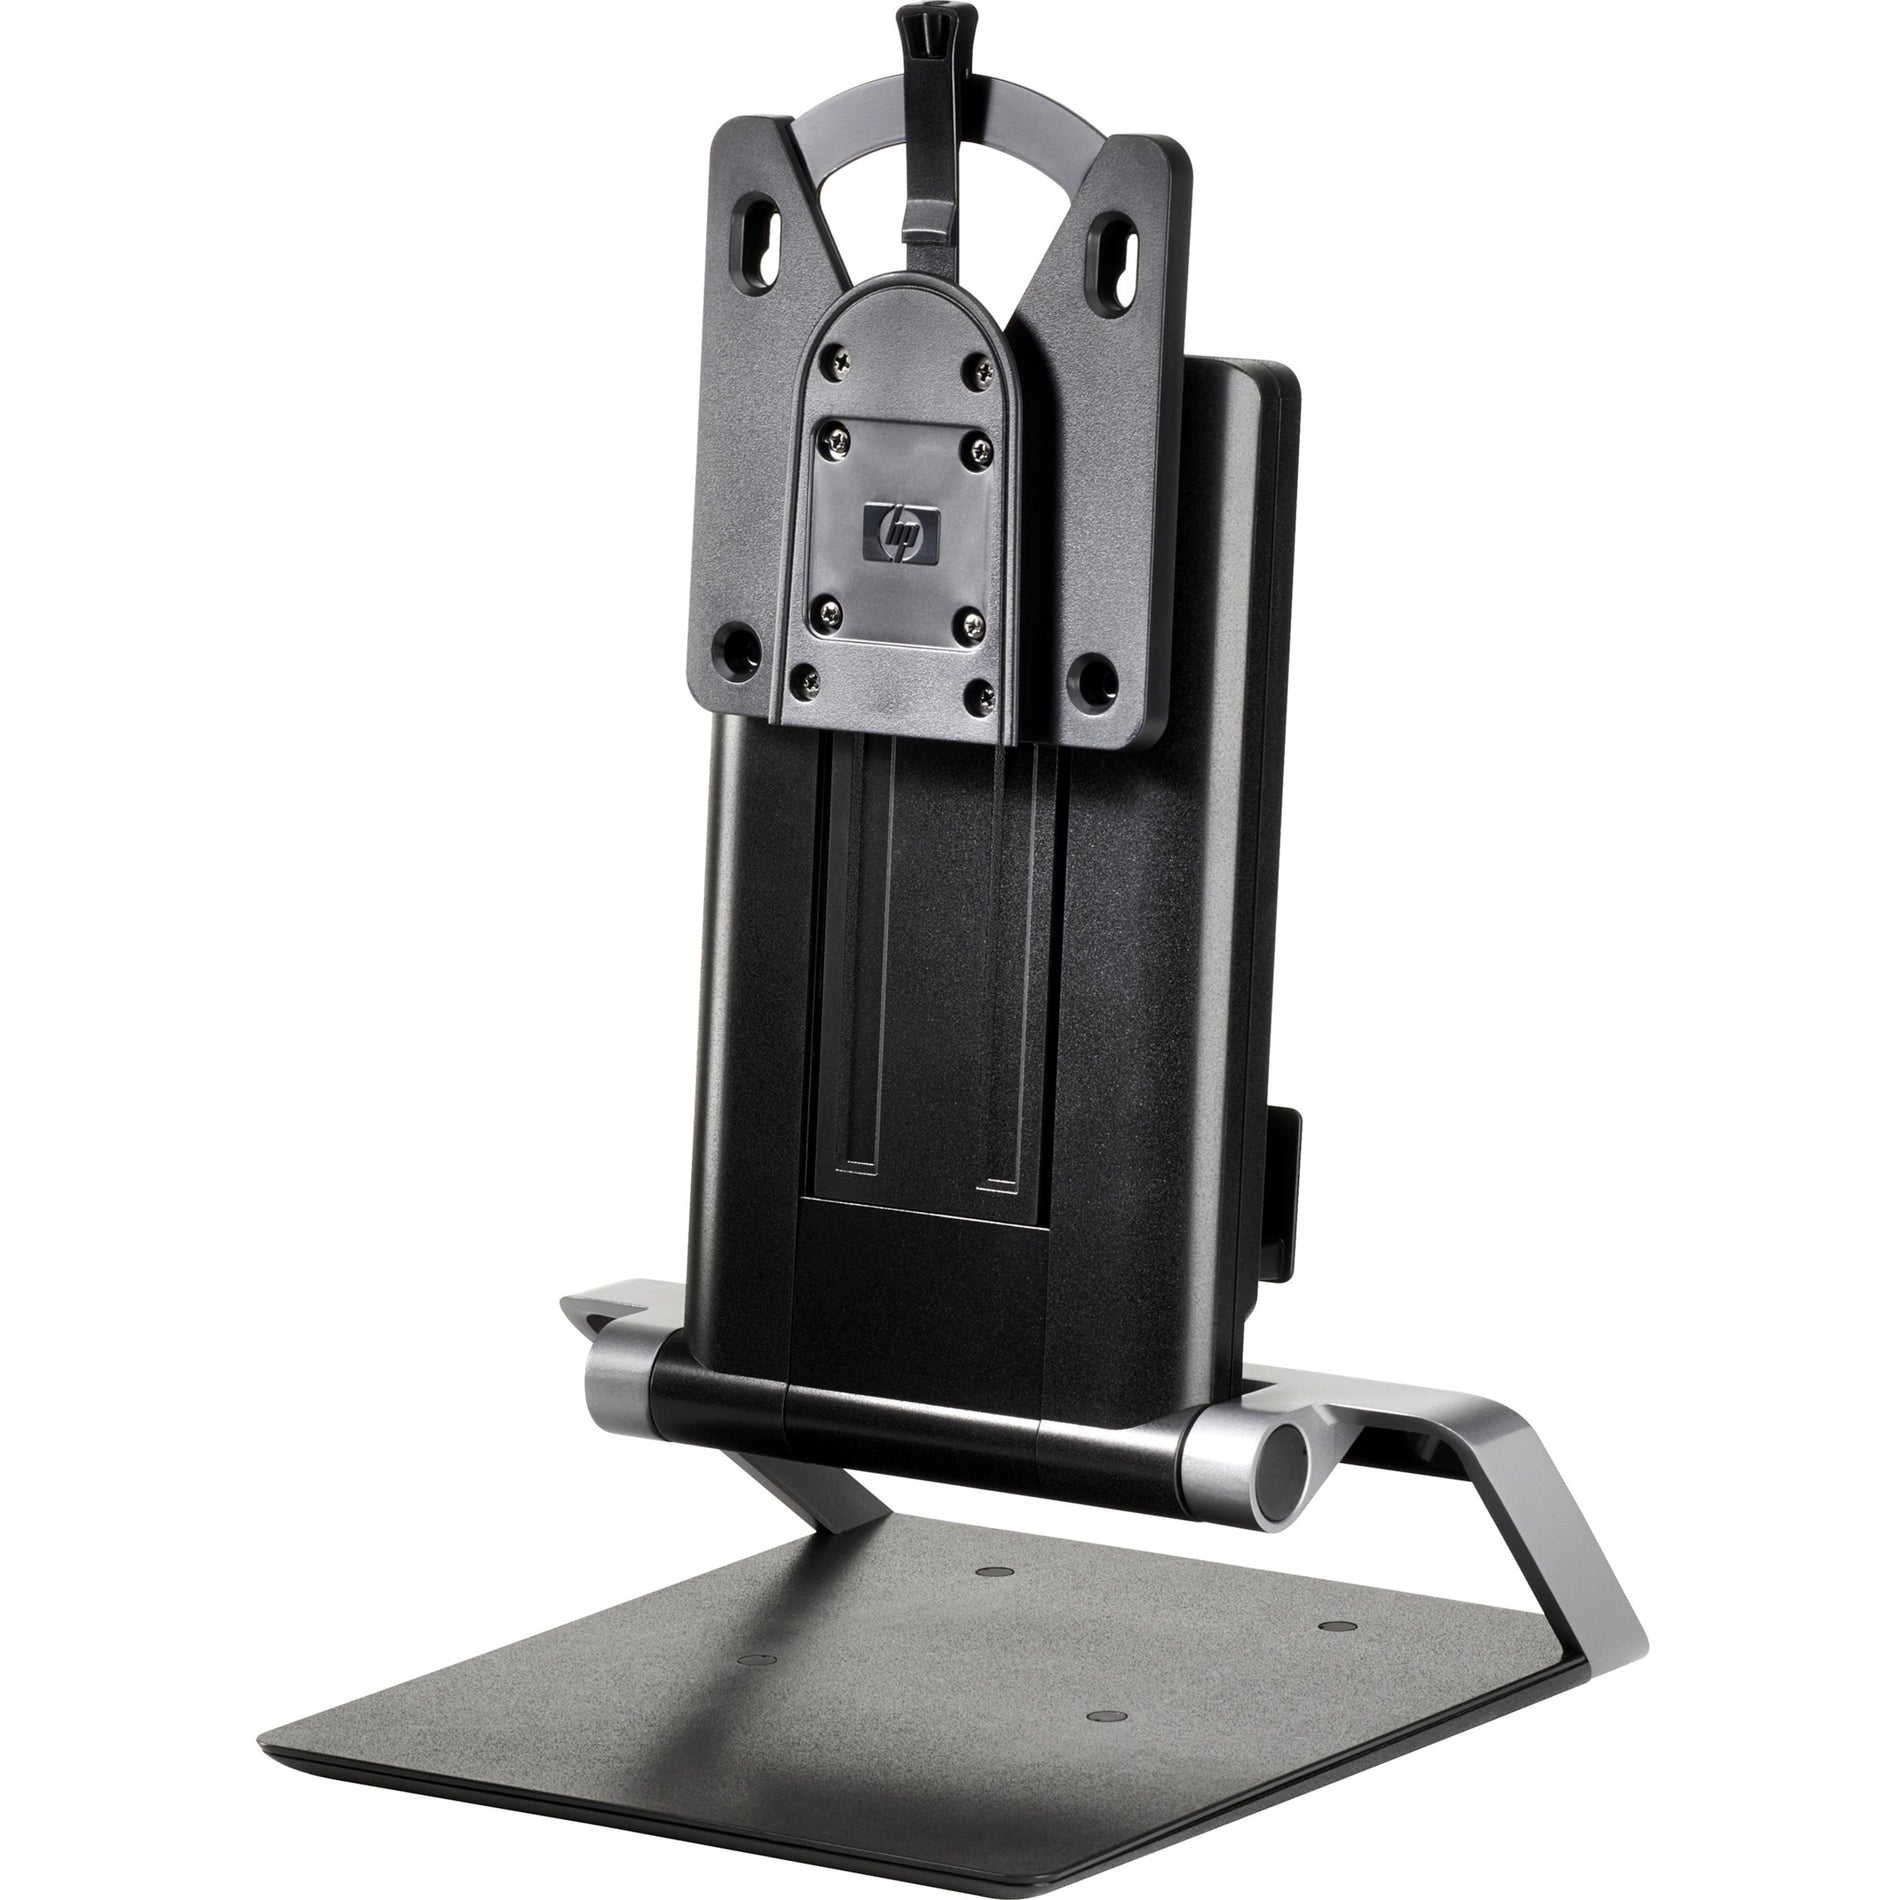 HP IWC Desktop Mini/TC - Computer Stand with Adjustable Height, Swivel, Tilt, and Rotate [Discontinued]